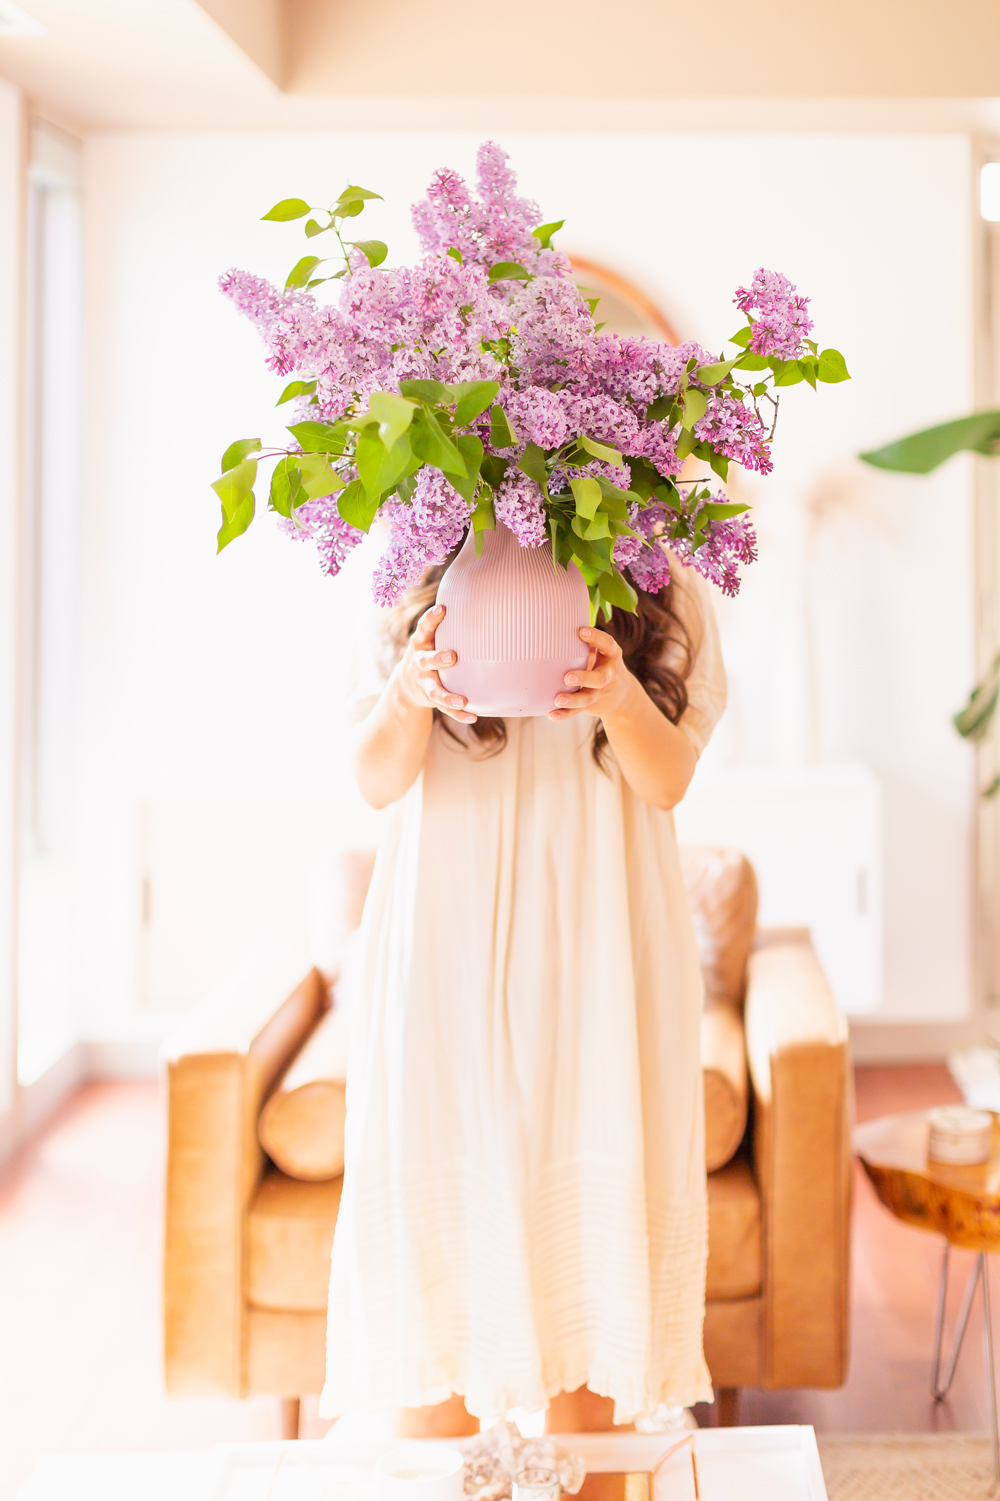 How to Create a Lilac Bouquet | Brunette woman in a flowy linen dress holding an oversized lilac arrangement in her neutral mid century meets boho modern living room | DIY Lilac Flower Arrangement | How to Forage Lilacs | How to Prolong Lilac Vase Life | How to Arrange Lilacs | Fresh Lilac Flower Bouquet | Extremely Pretty Lilac Arrangement | Purple Lilac Arrangement | How to Cut Lilacs from a tree or bush | Calgary Creative Lifestyle Blogger // JustineCelina.com